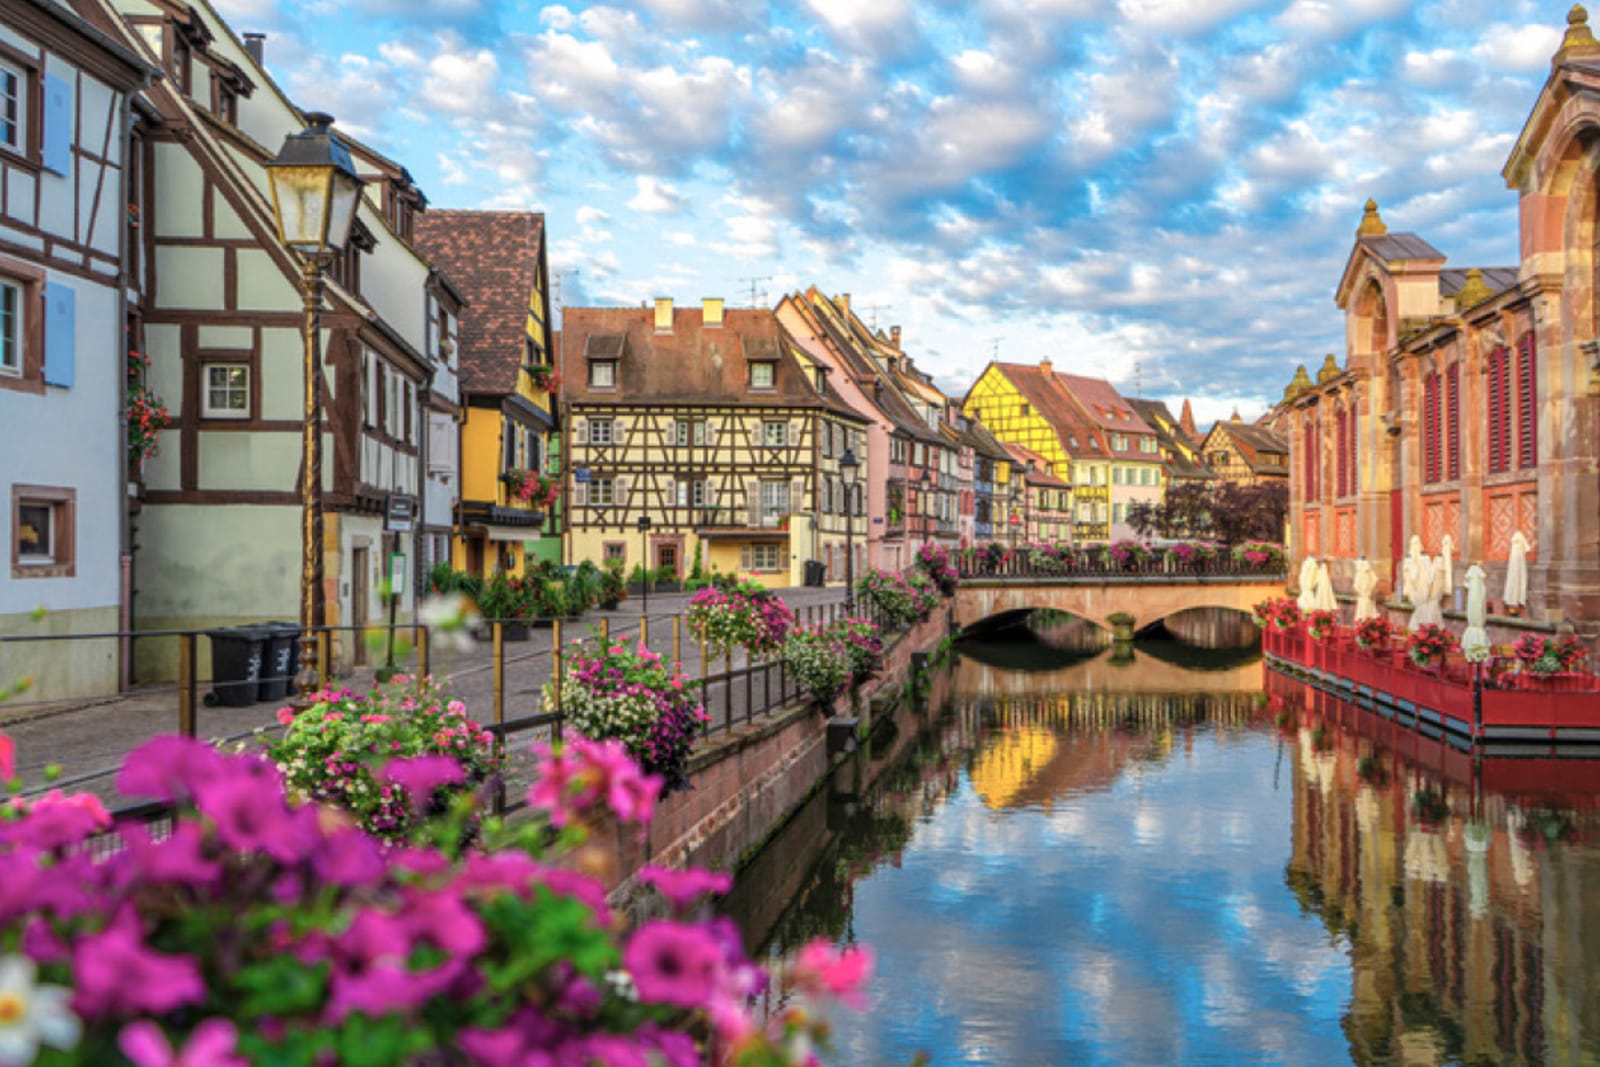 A canal lined with half-timbered houses in Strasbourg, France